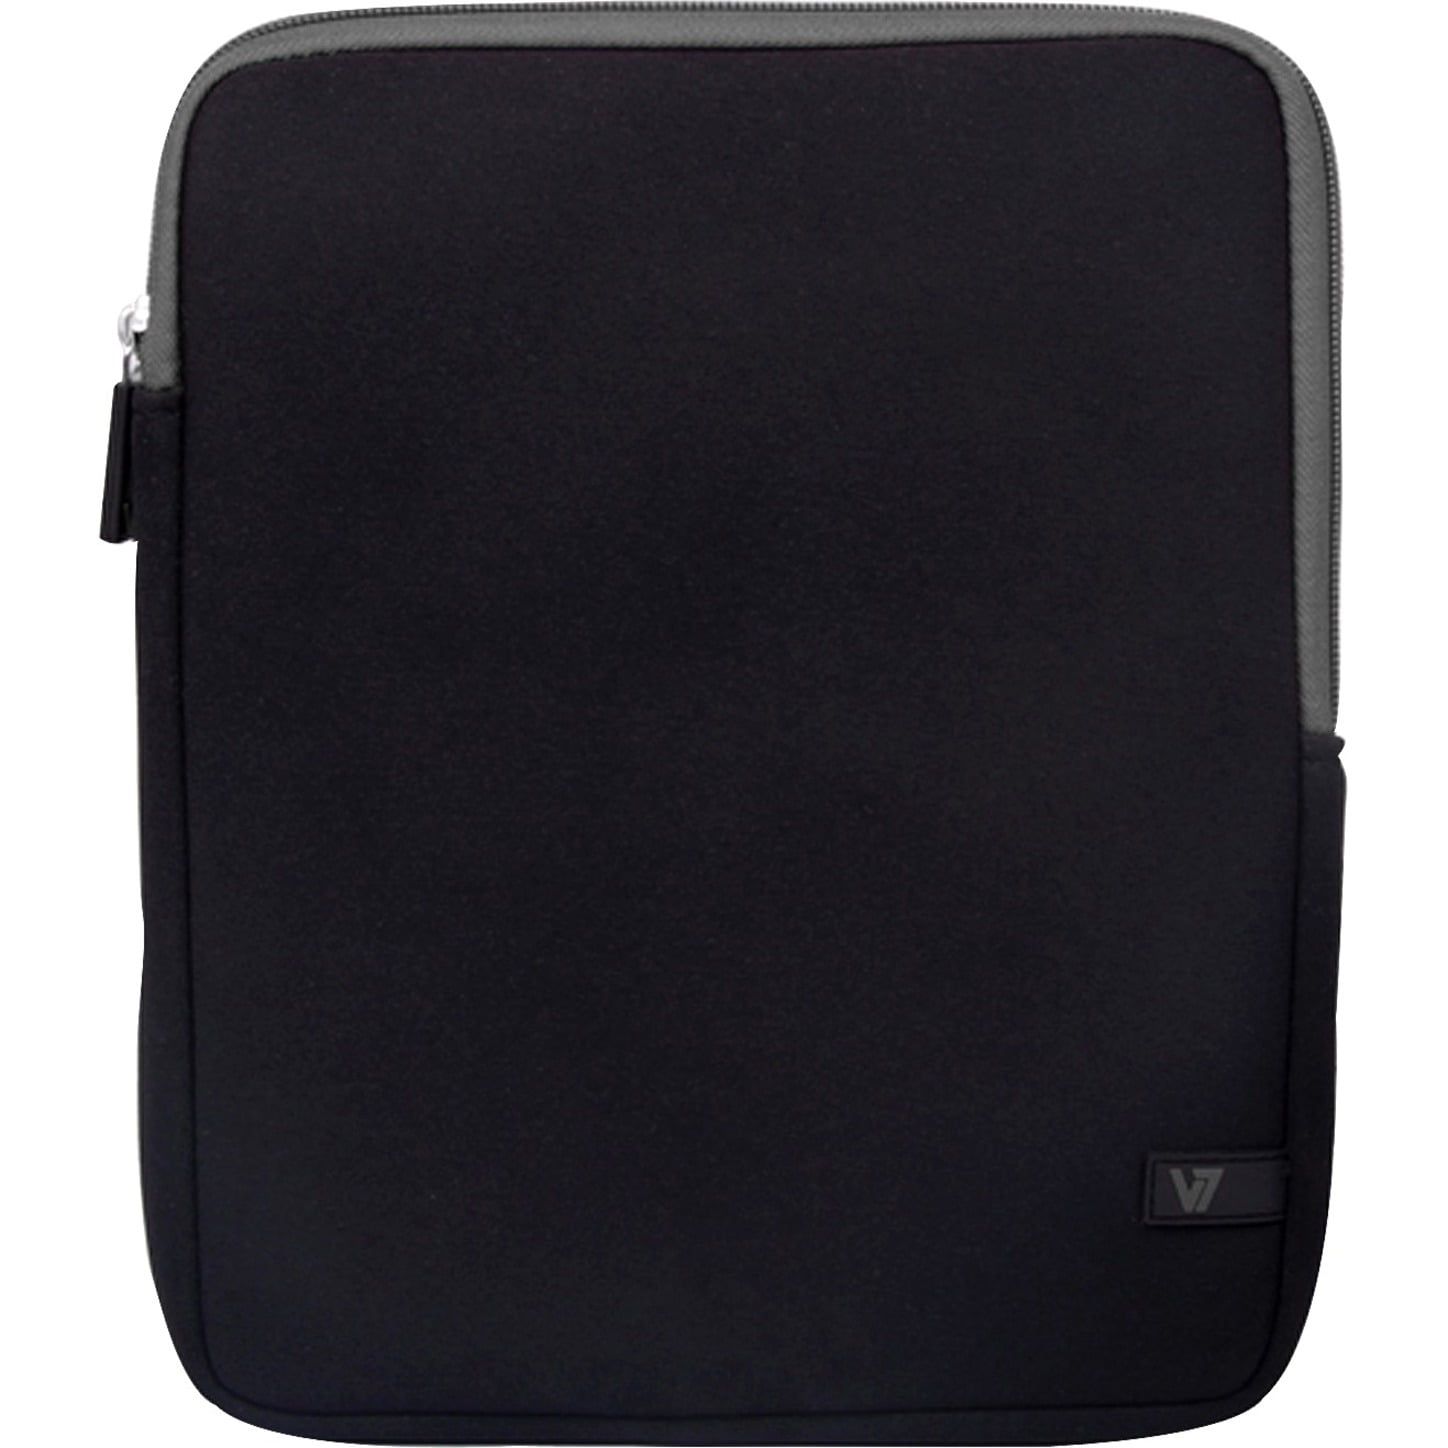 V7 Ultra TD23BLK-GY-2N Carrying Case (Sleeve) for 10.1